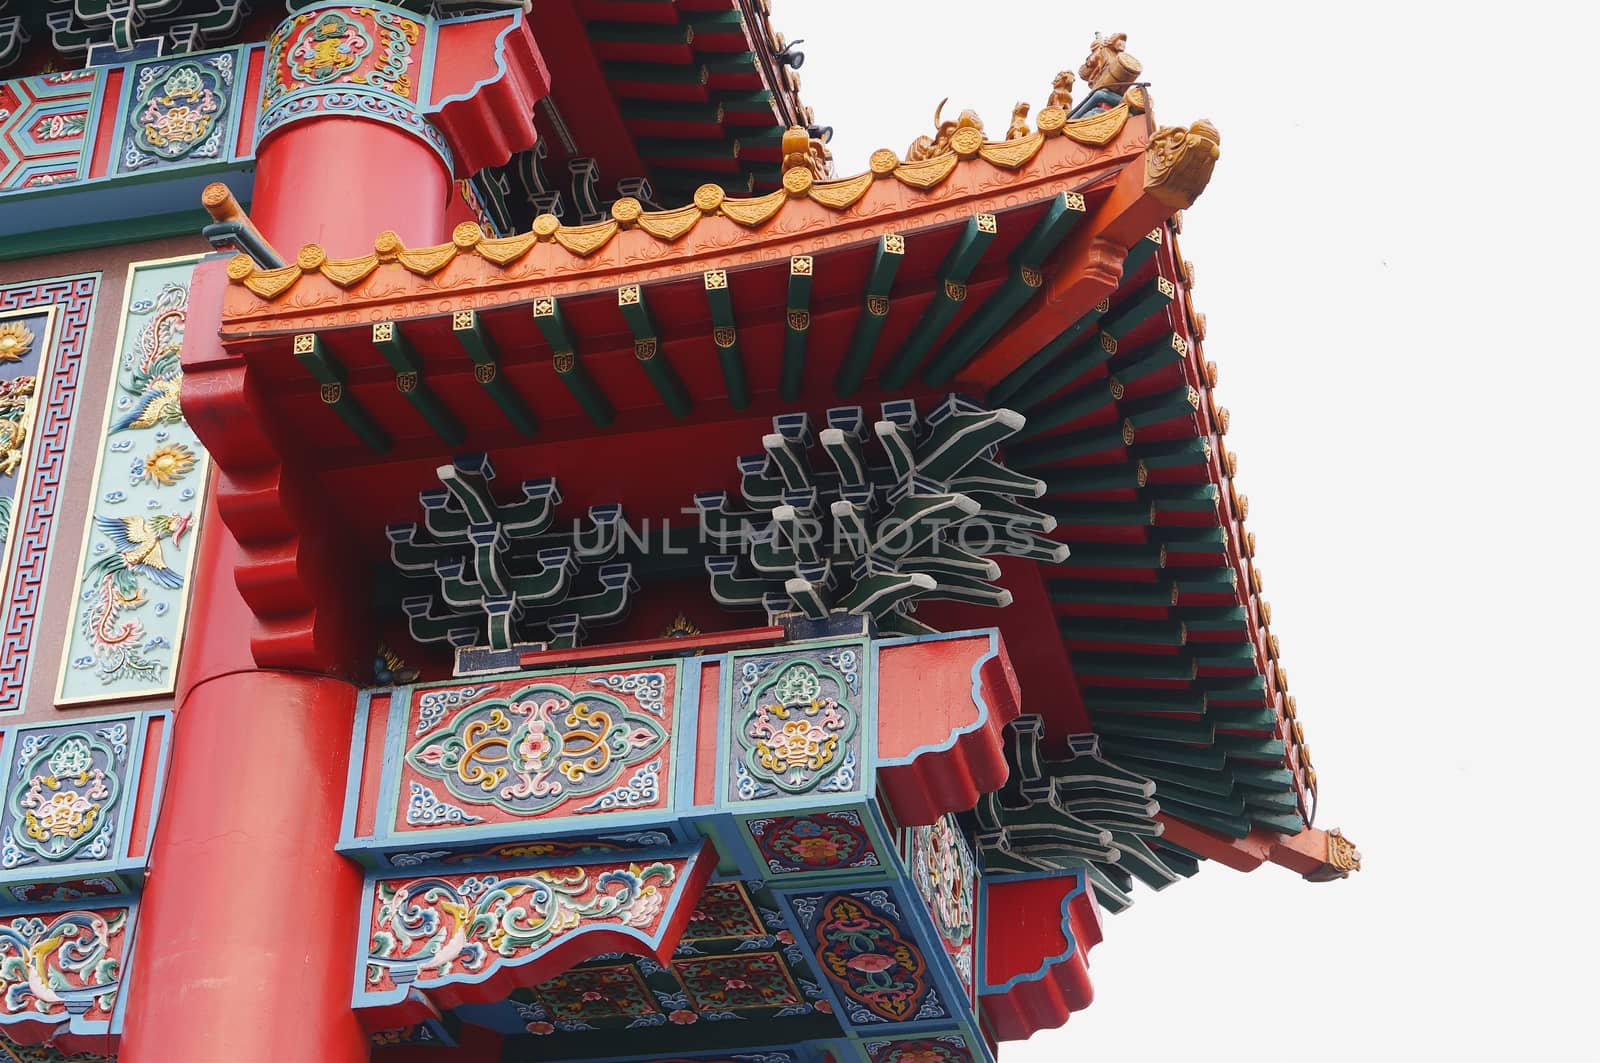 Arch of Chinese door facade by ninun